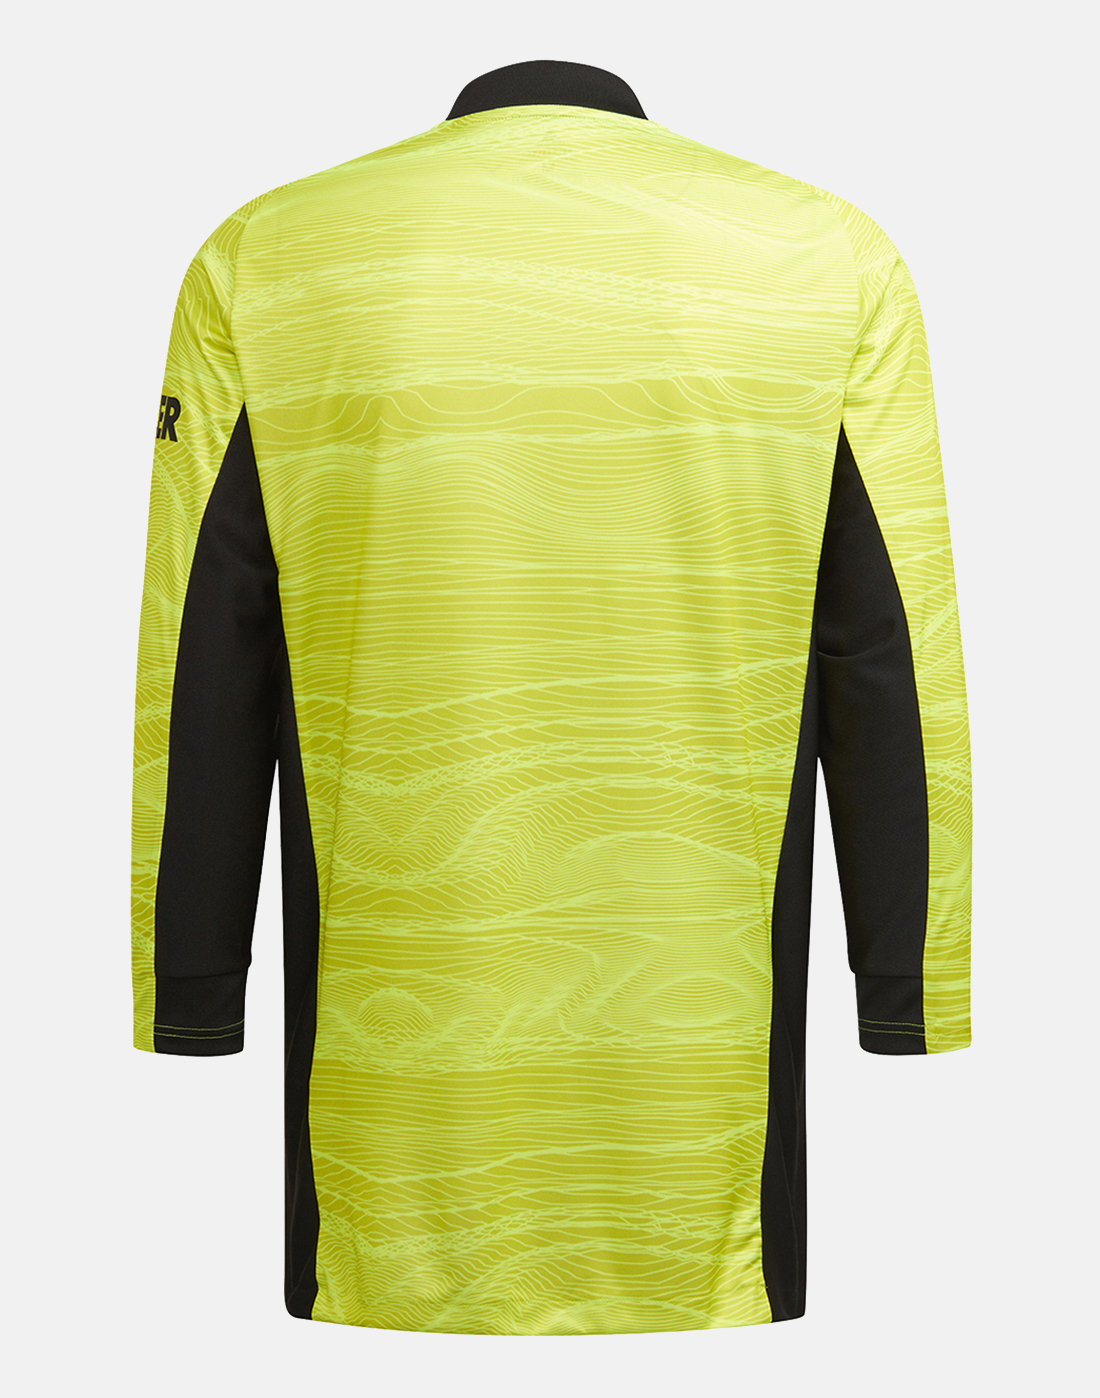 Manchester United Blank Yellow Goalkeeper Kid Soccer Club Jersey